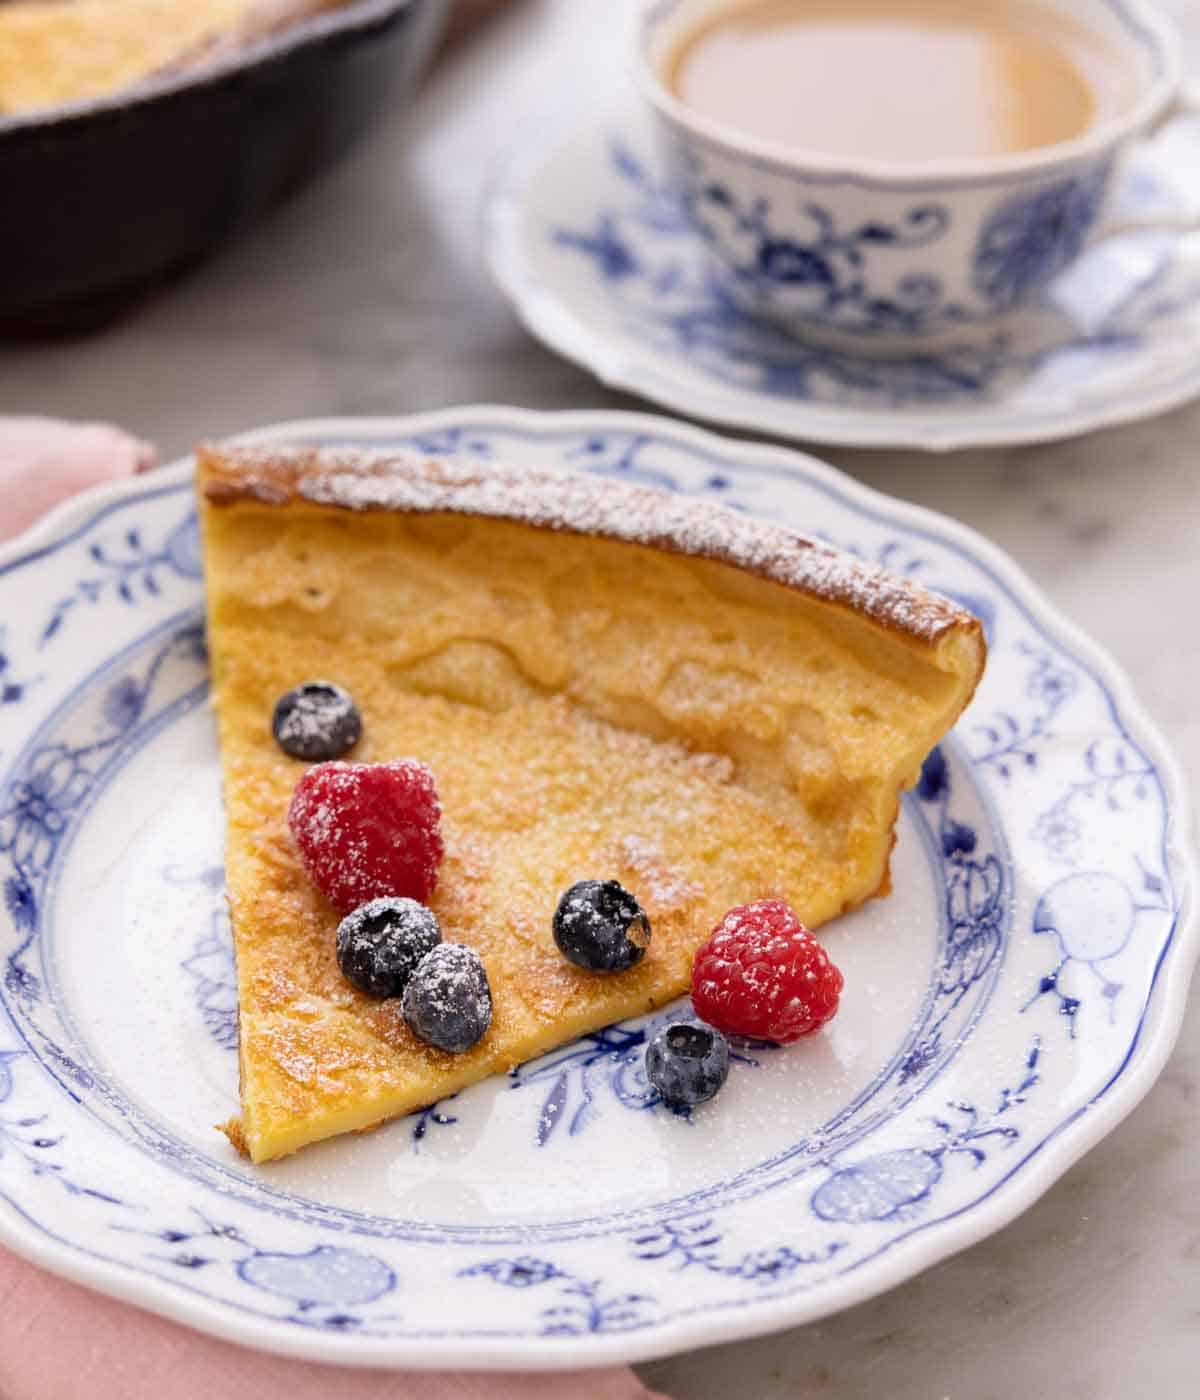 A plate with a slice of Dutch baby with powder sugar and fresh berries on top with a cup of tea in the back.